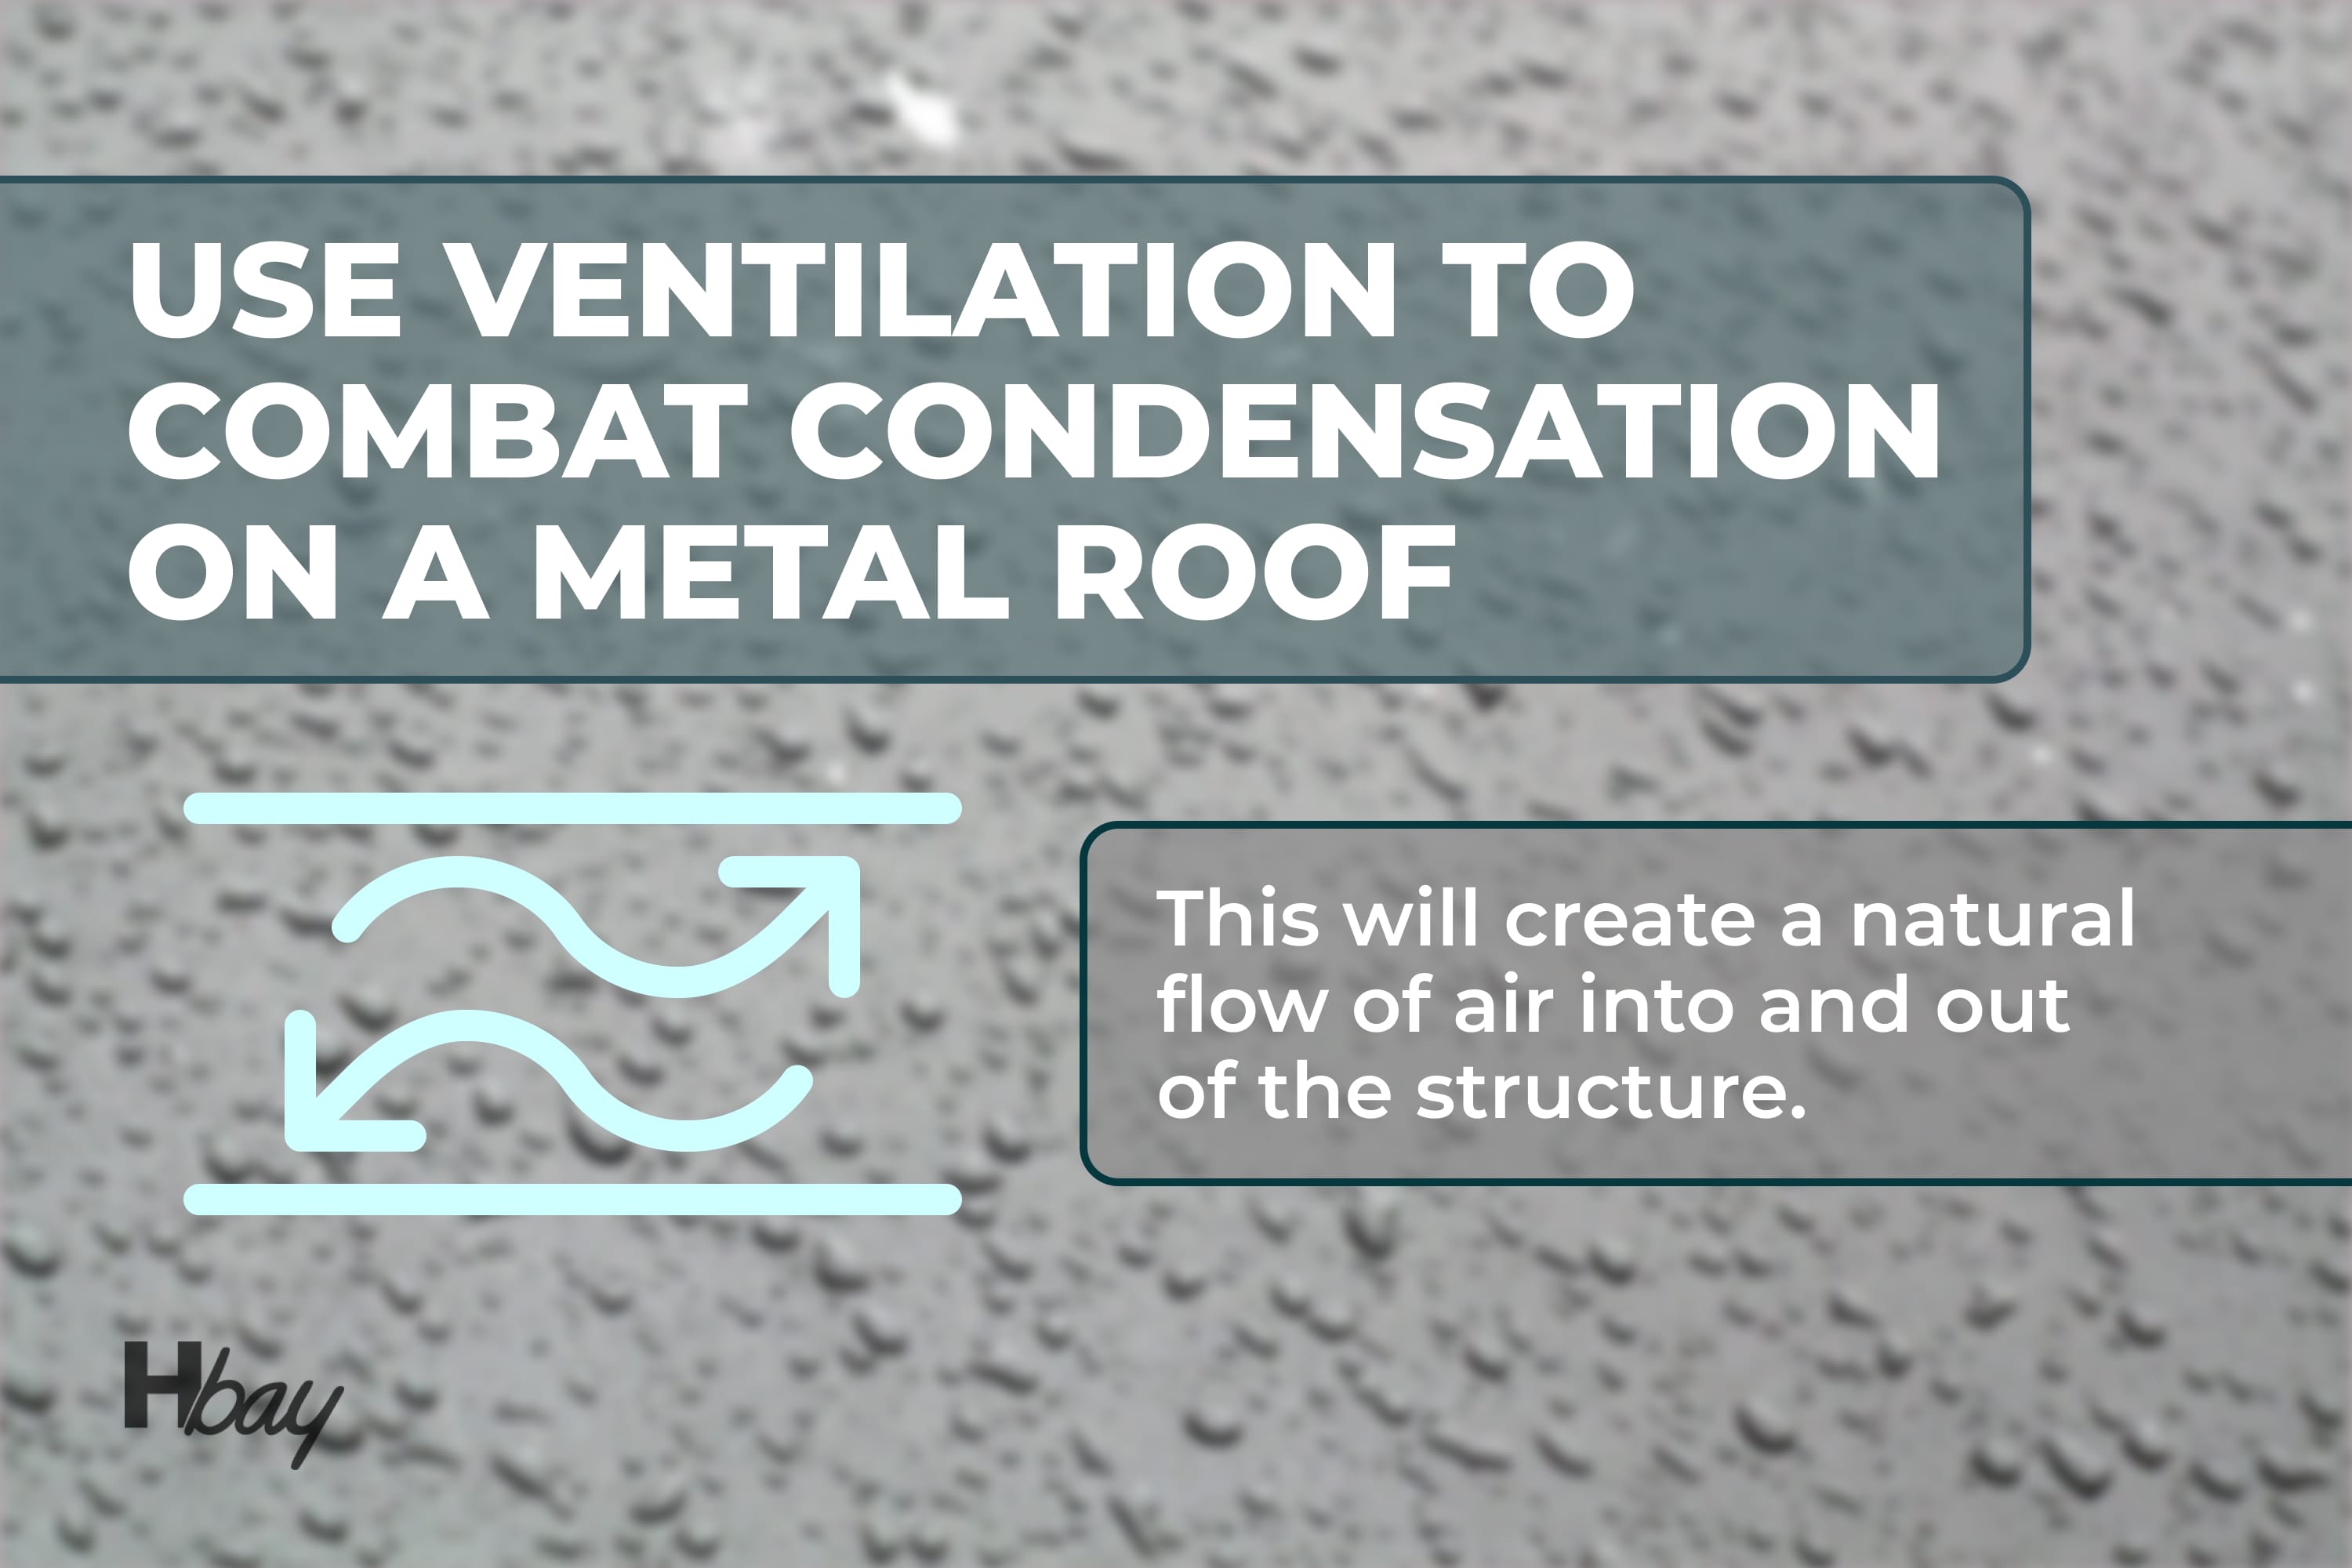 Use ventilation to combat condensation on a metal roof